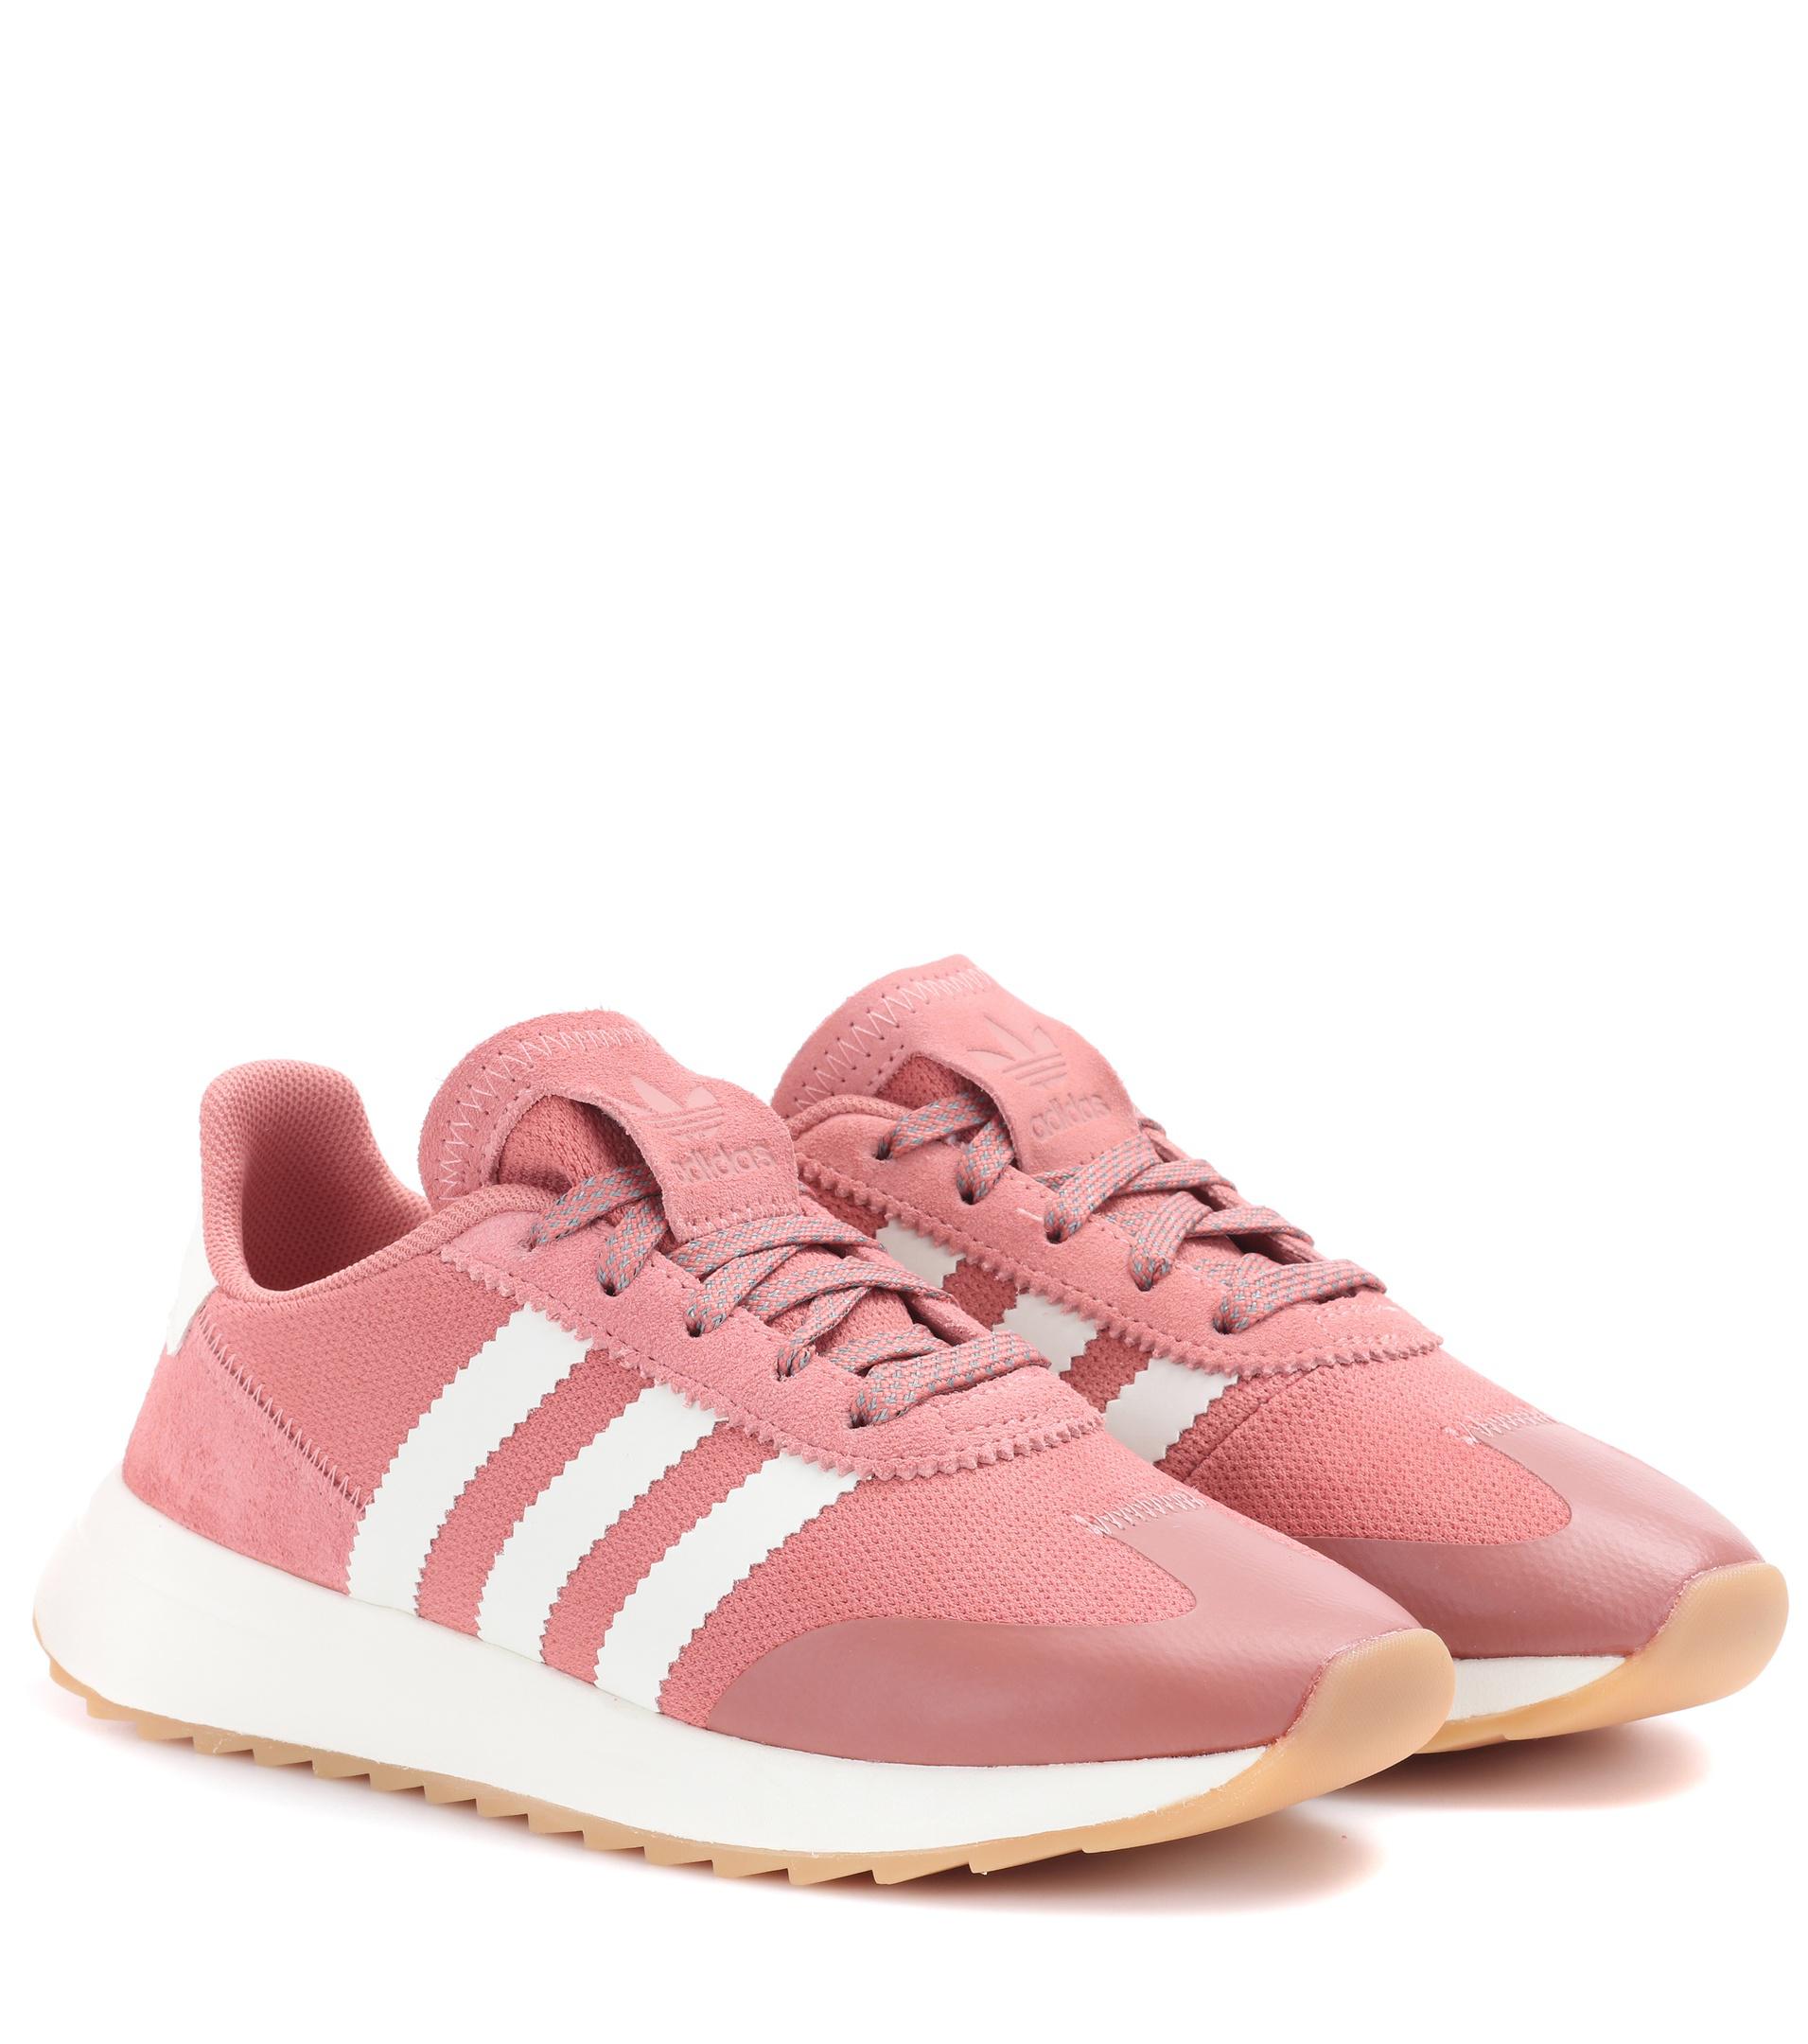 adidas flashback pink, OFF 72%,Latest trends,